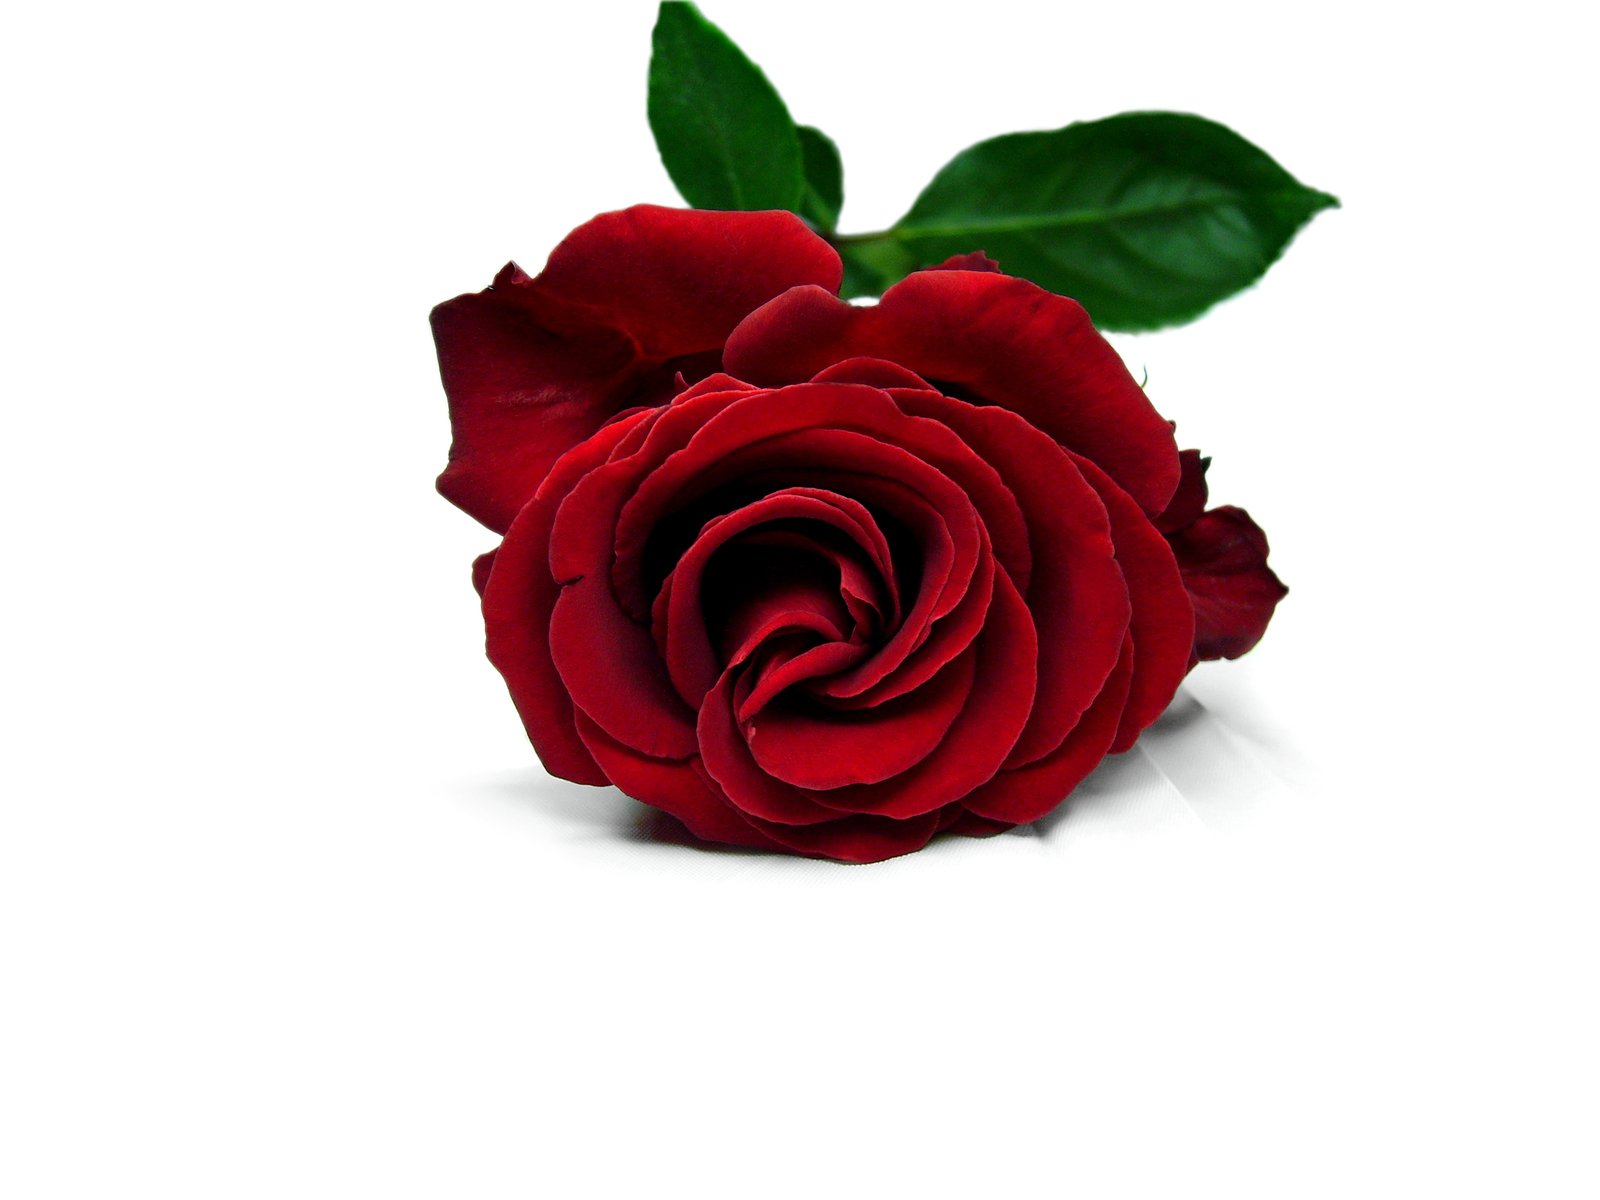 a single red rose with green leaves on top of it